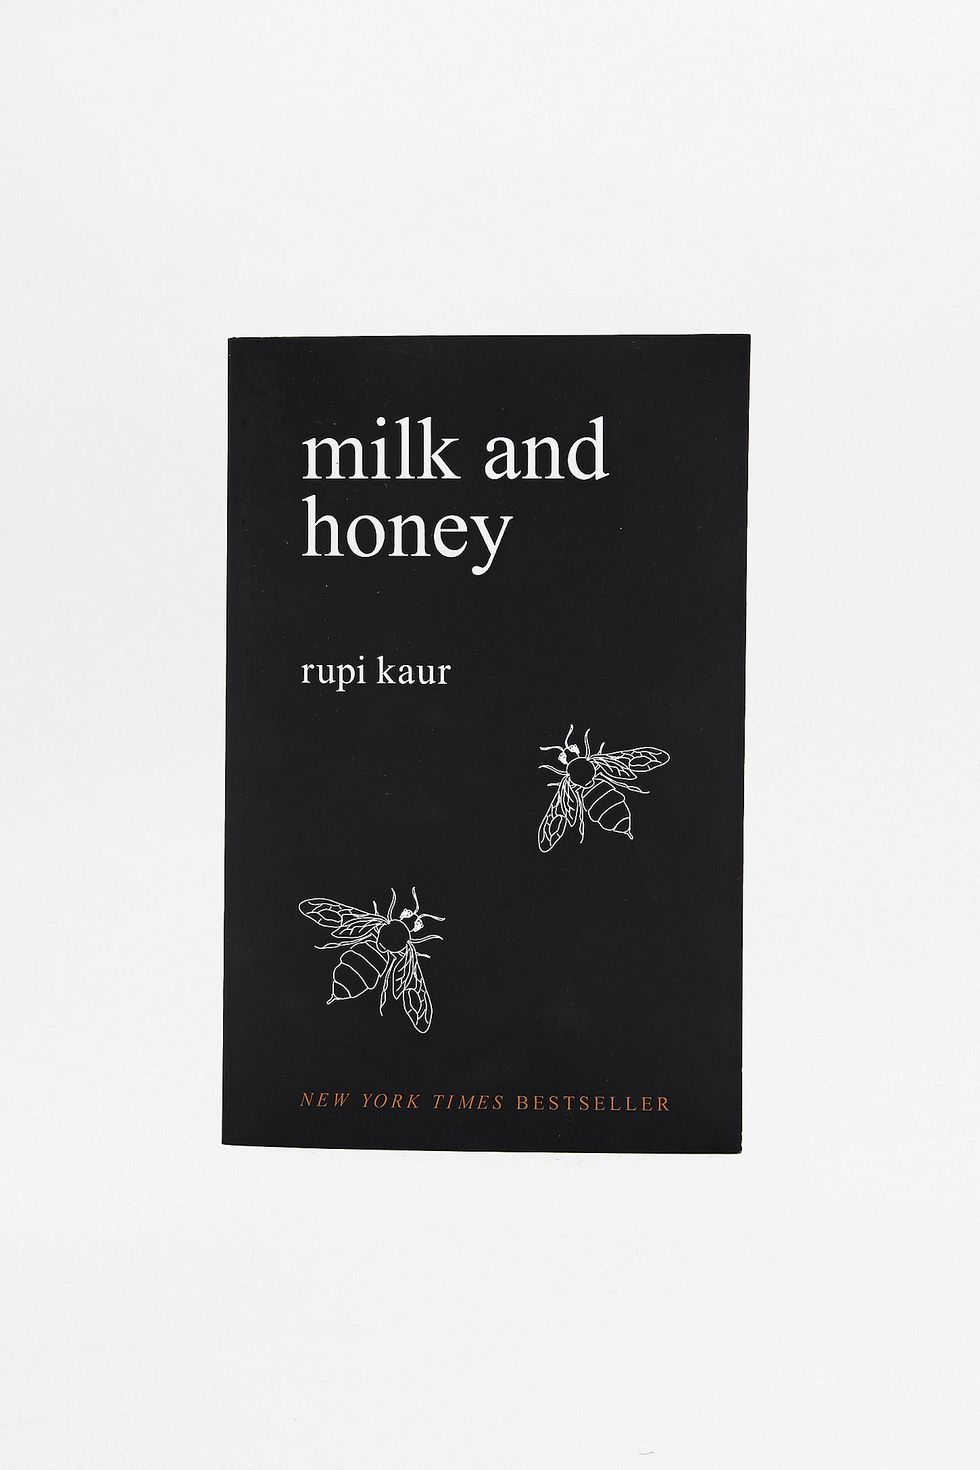 22 Pages Every Girl Should Read From "Milk And Honey"